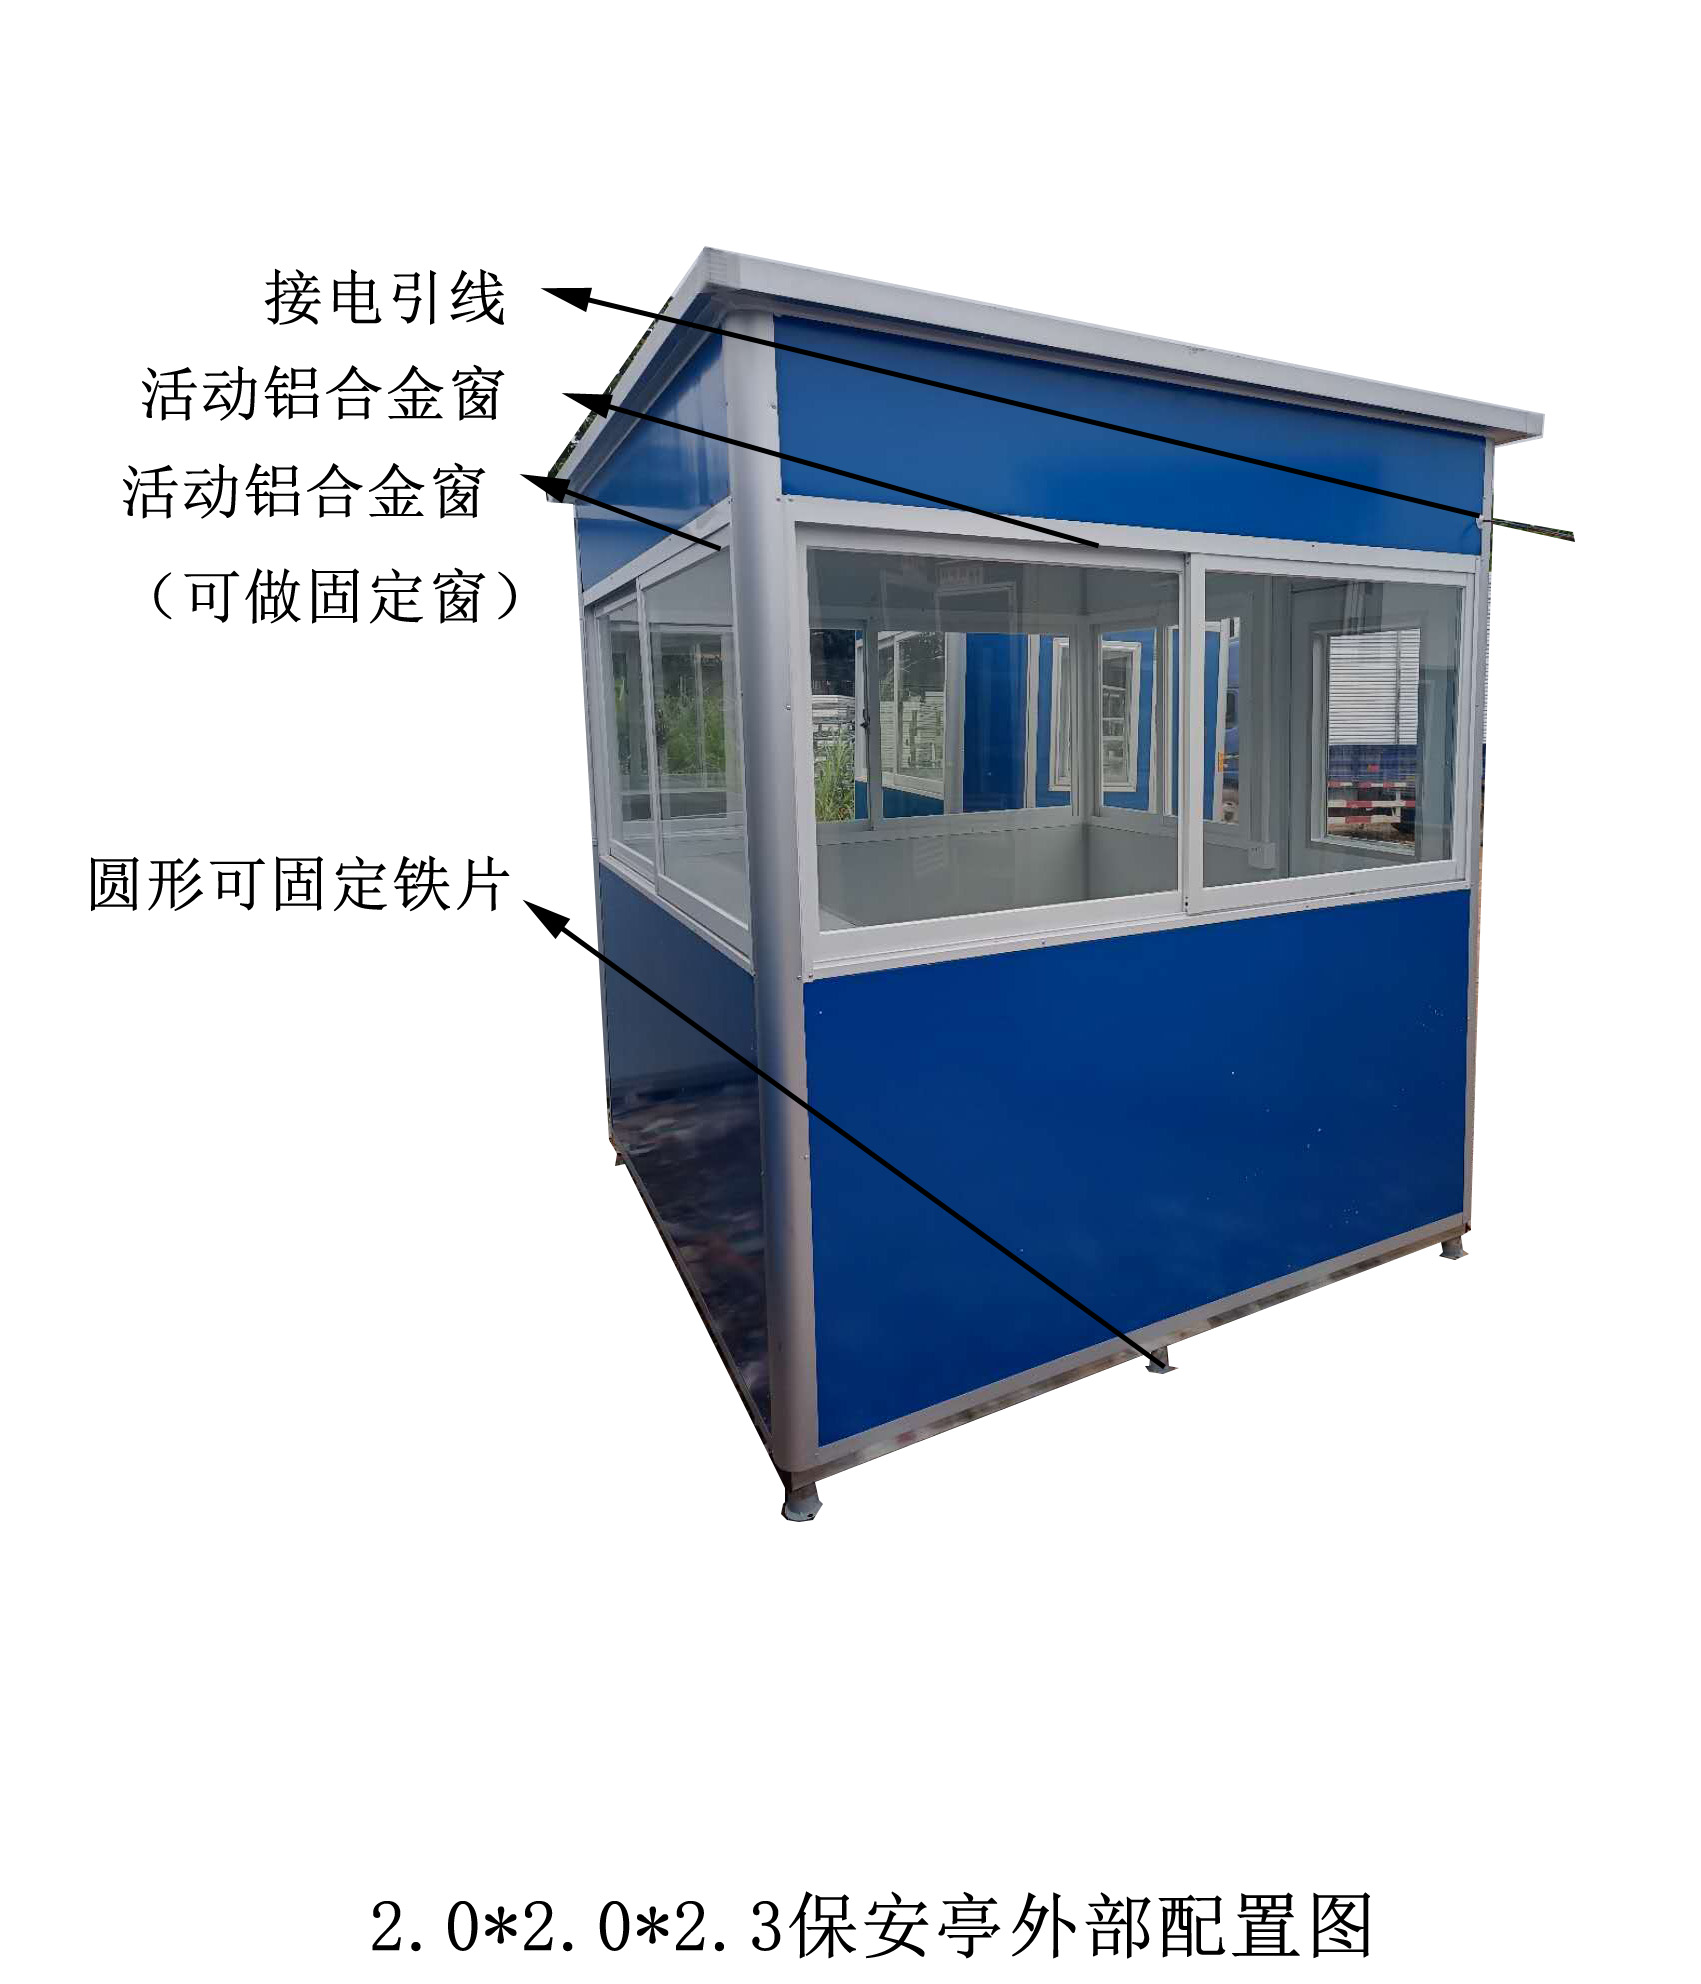 Small Guard House Outdoor Modern Security Booth